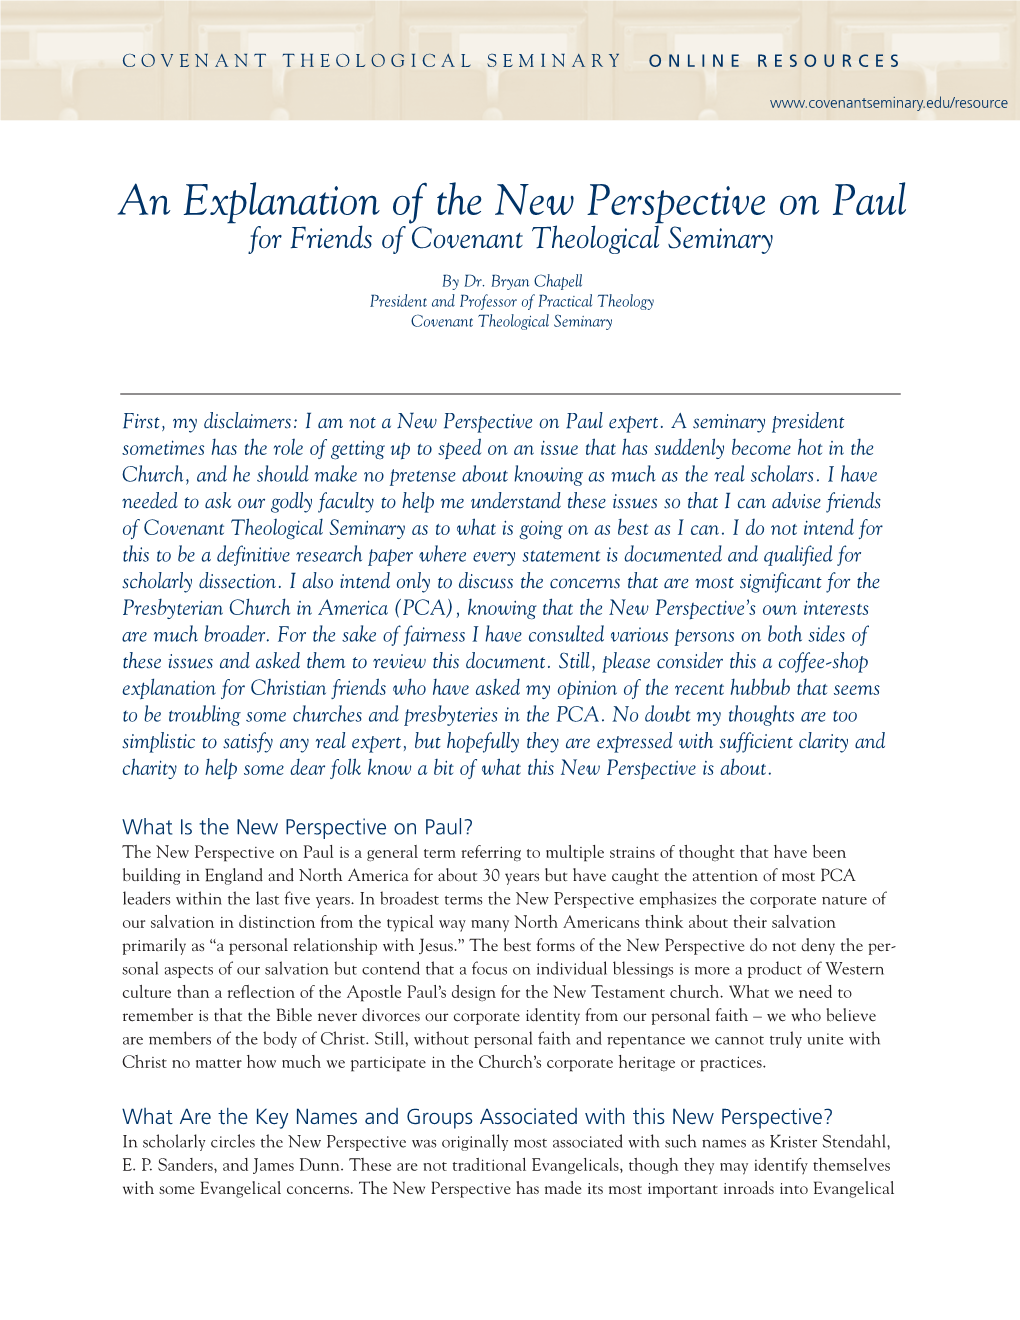 An Explanation of the New Perspective on Paul for Friends of Covenant Theological Seminary